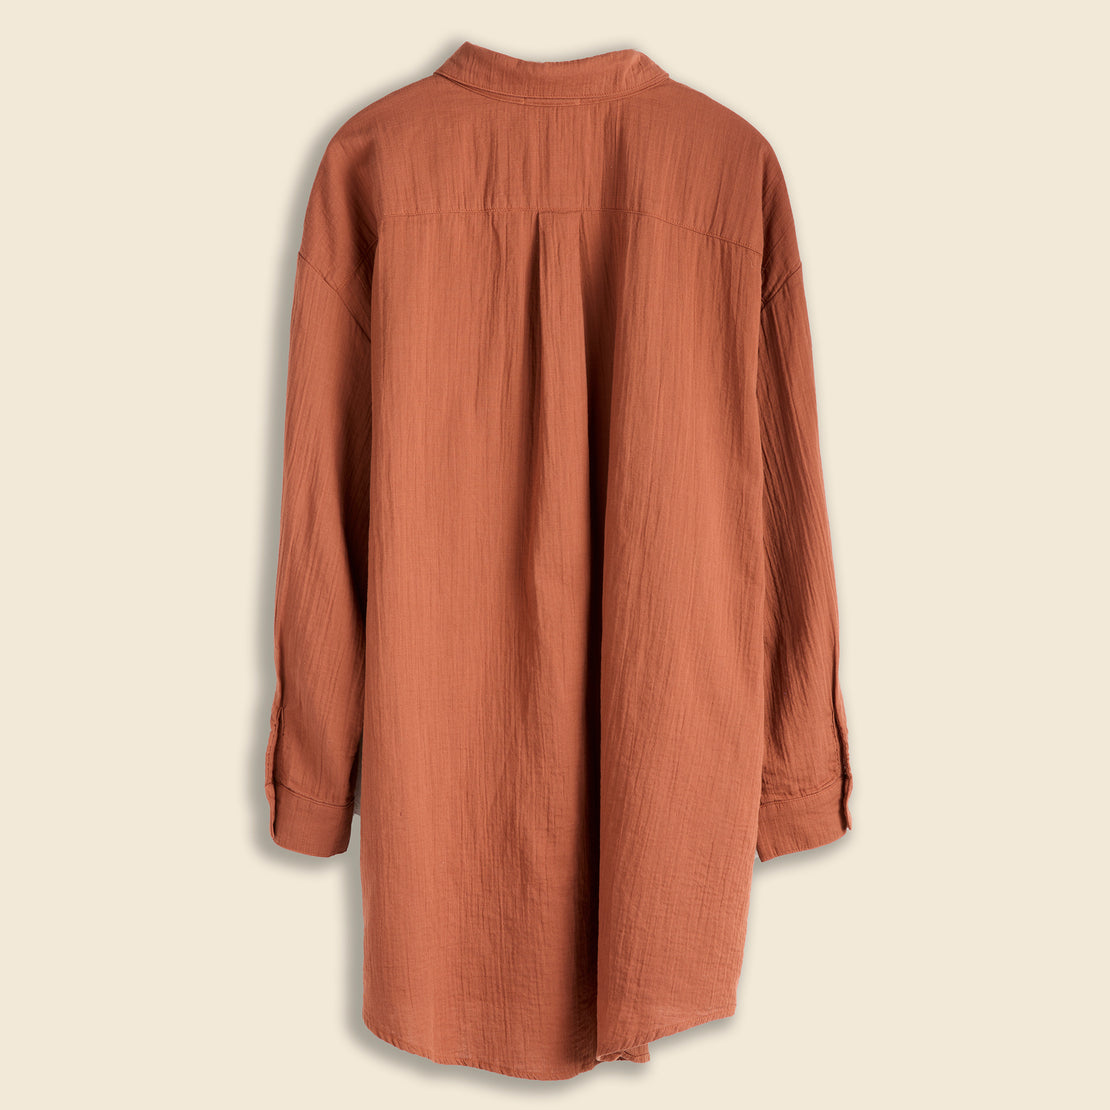 Oversized Overlay Gauze Shirt - Brick - Atelier Delphine - STAG Provisions - W - Tops - L/S Woven